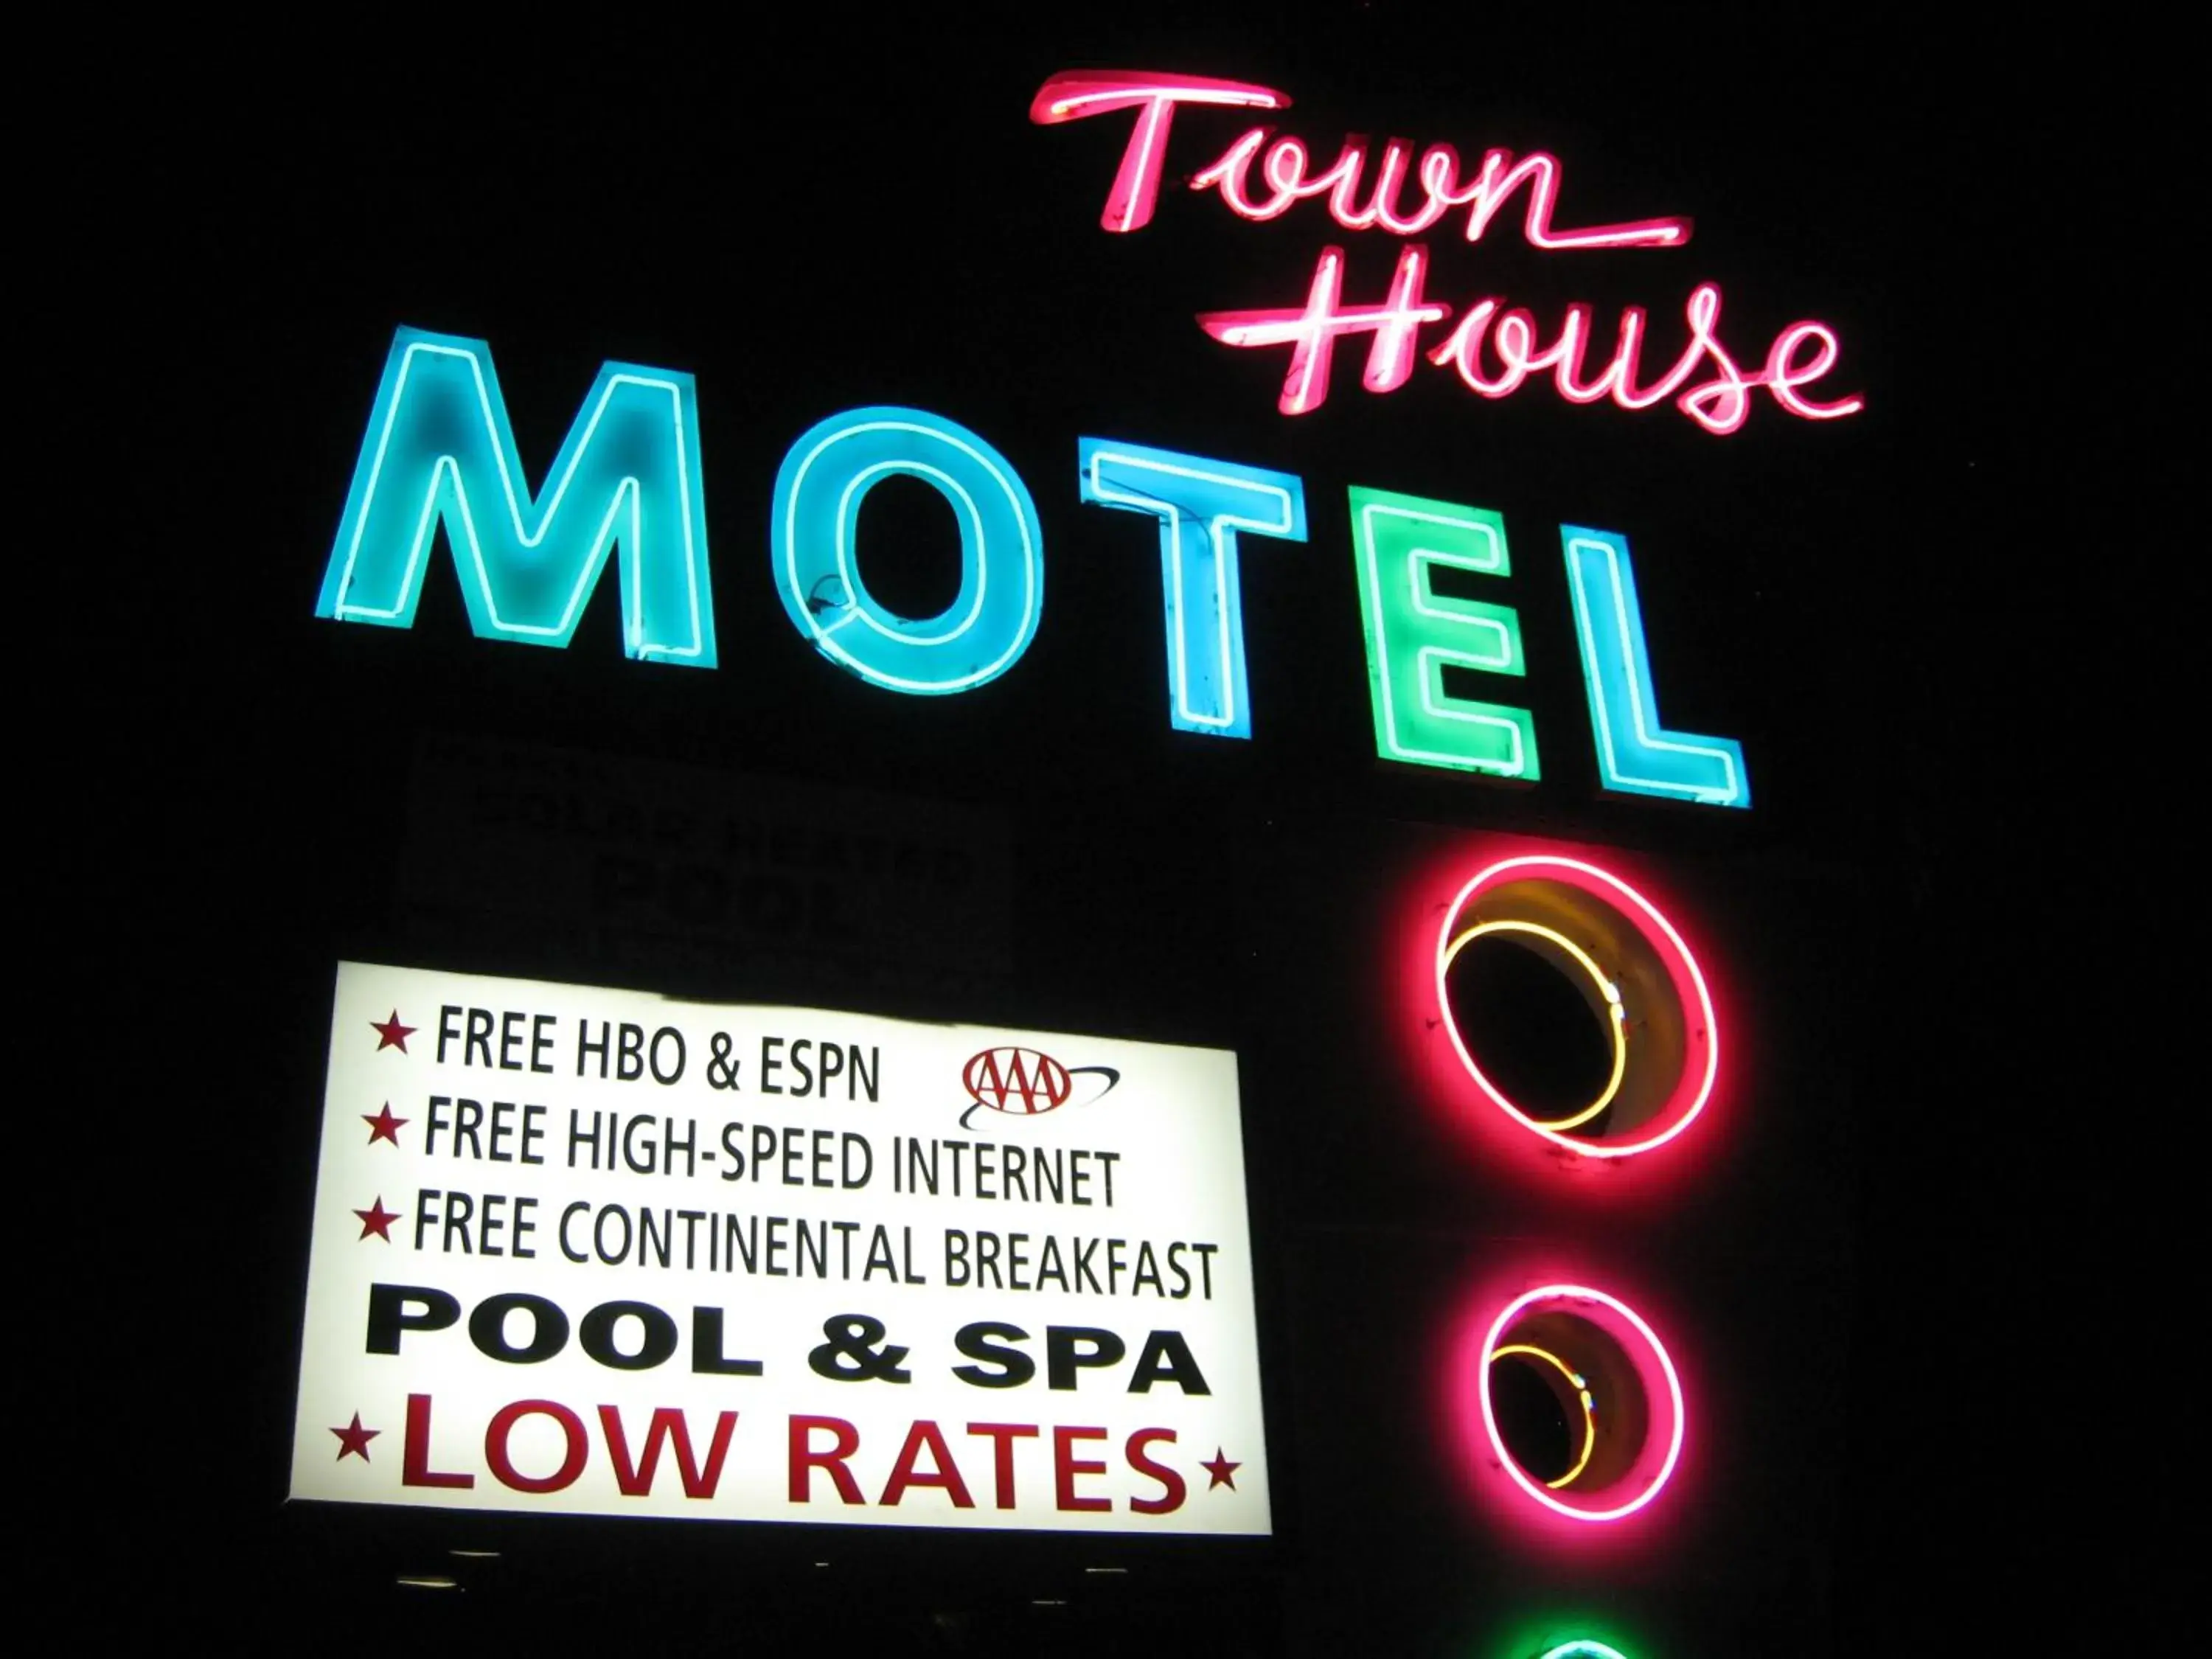 Night in Town House Motel